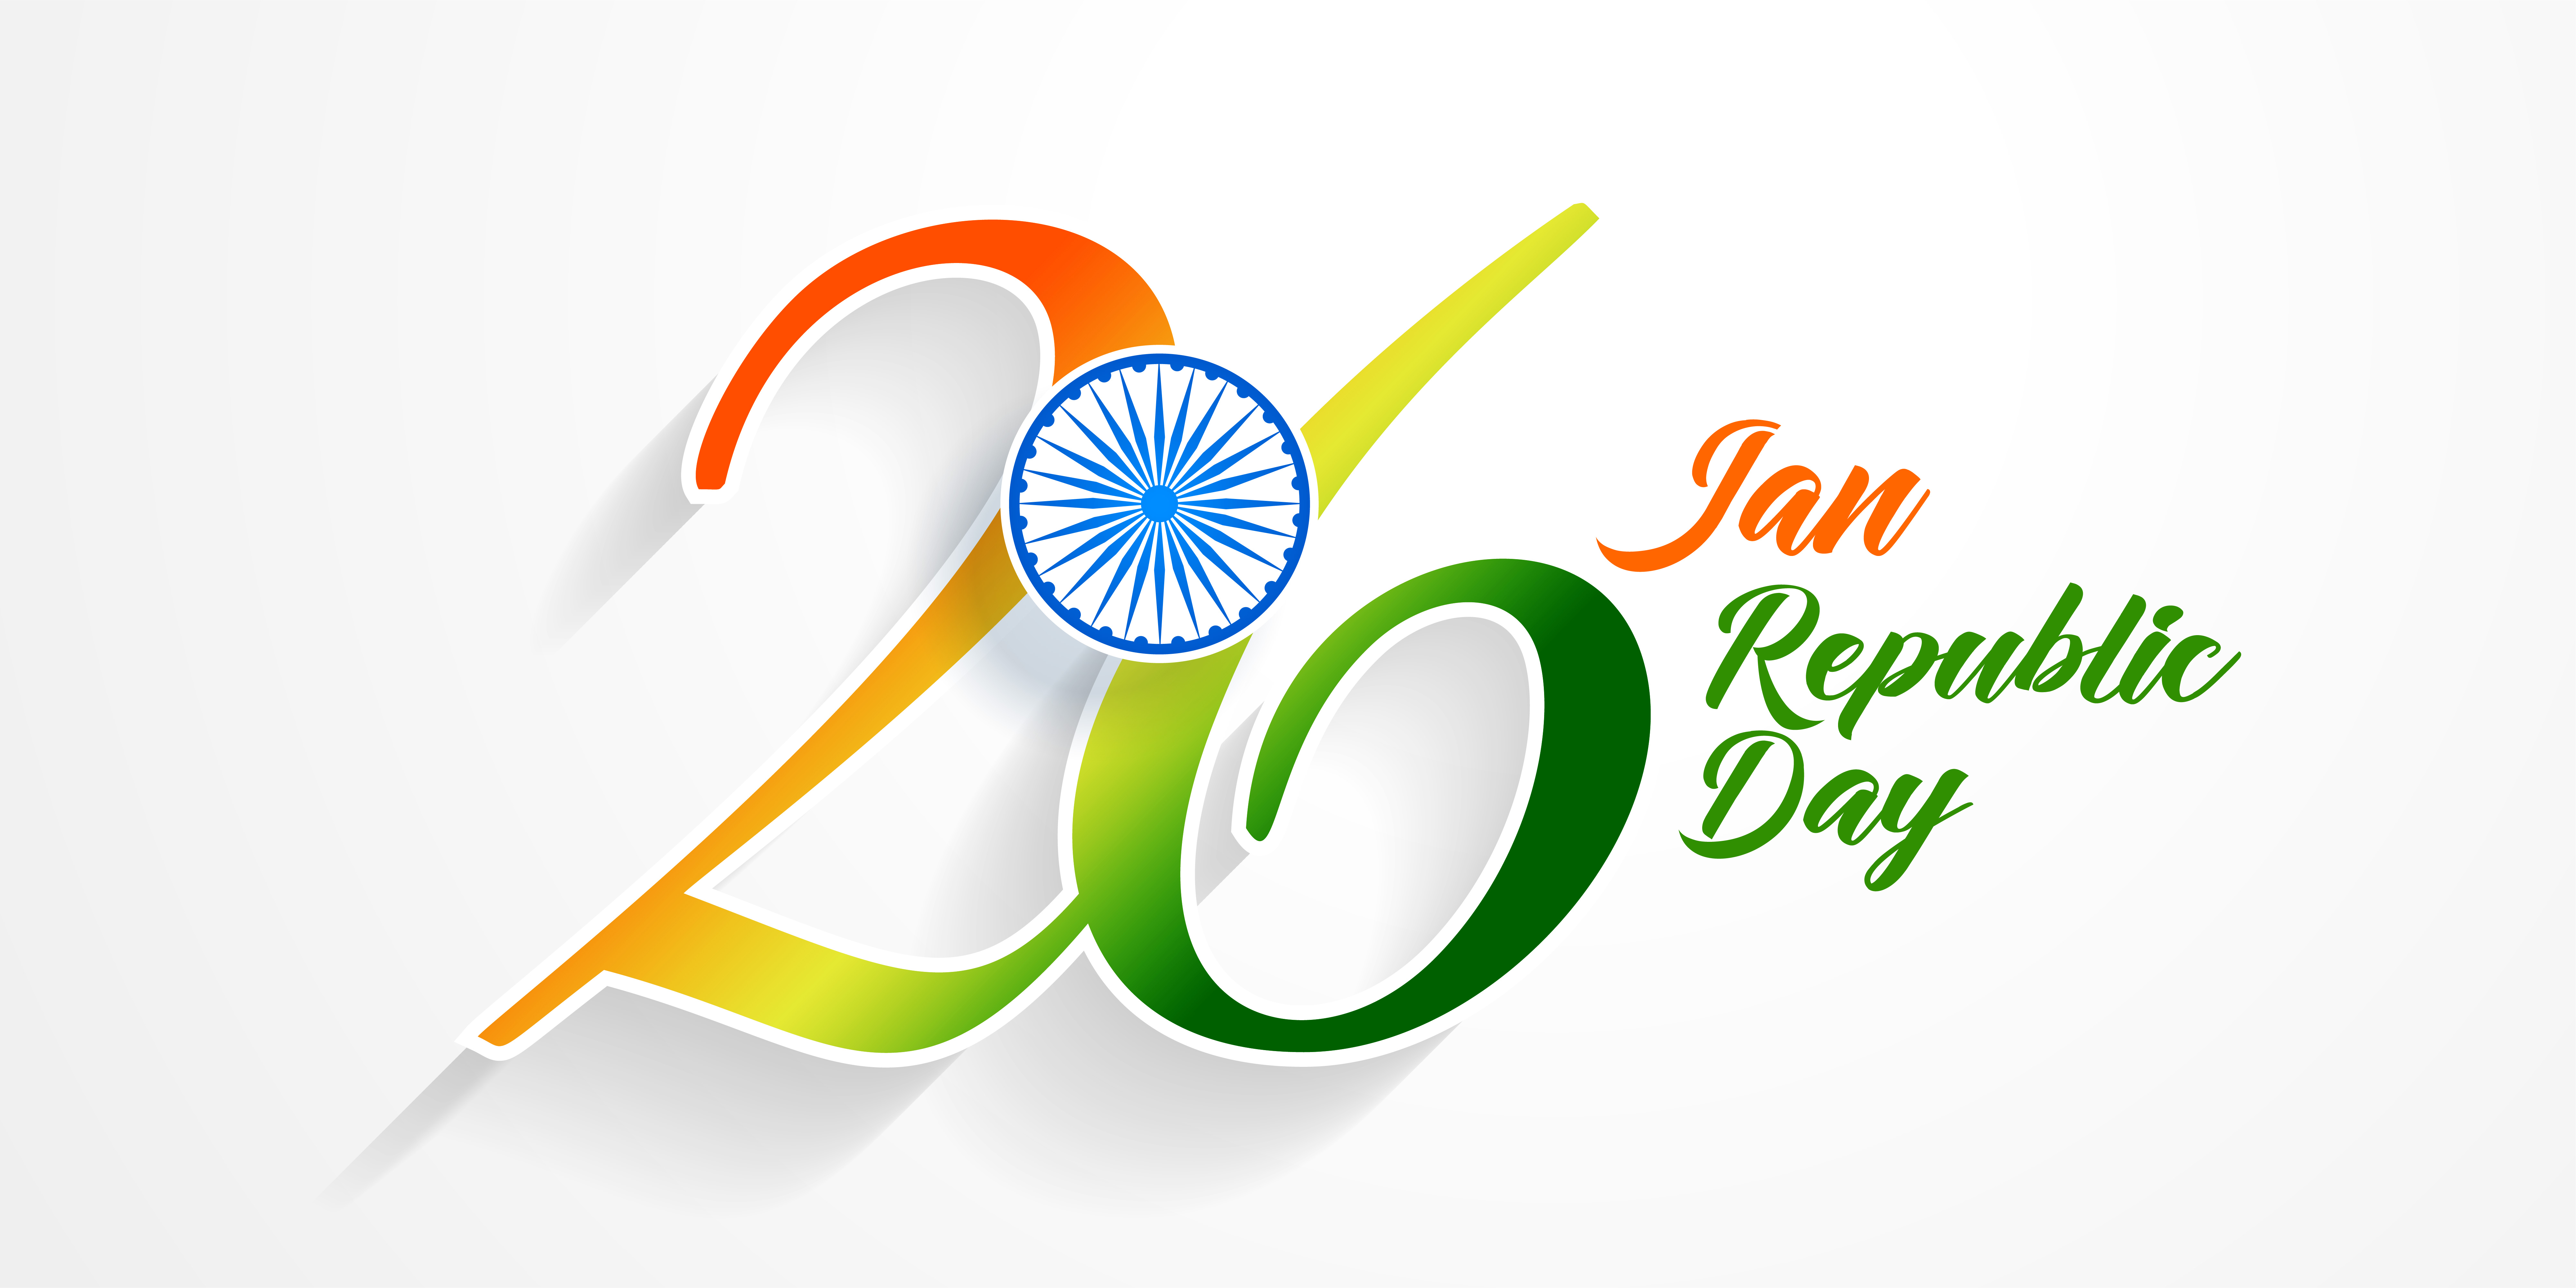 26th January Republic Day Of India Background Download Free Vector